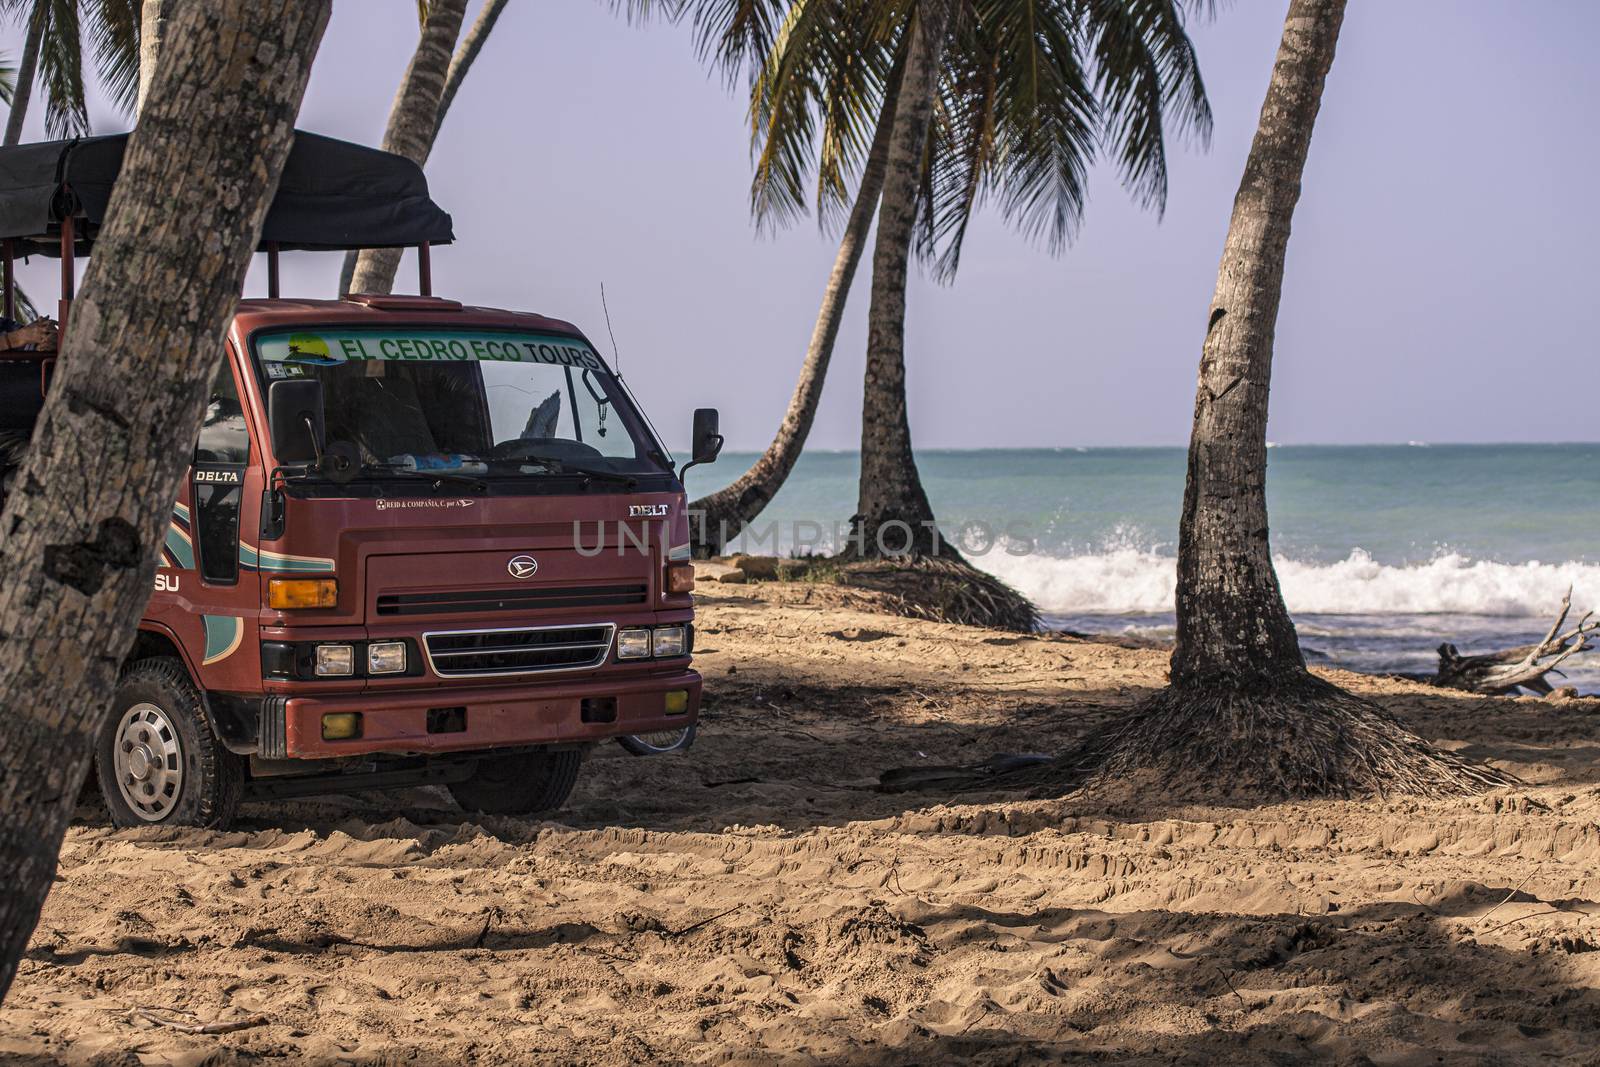 Minibus on the Caribbean beach by pippocarlot